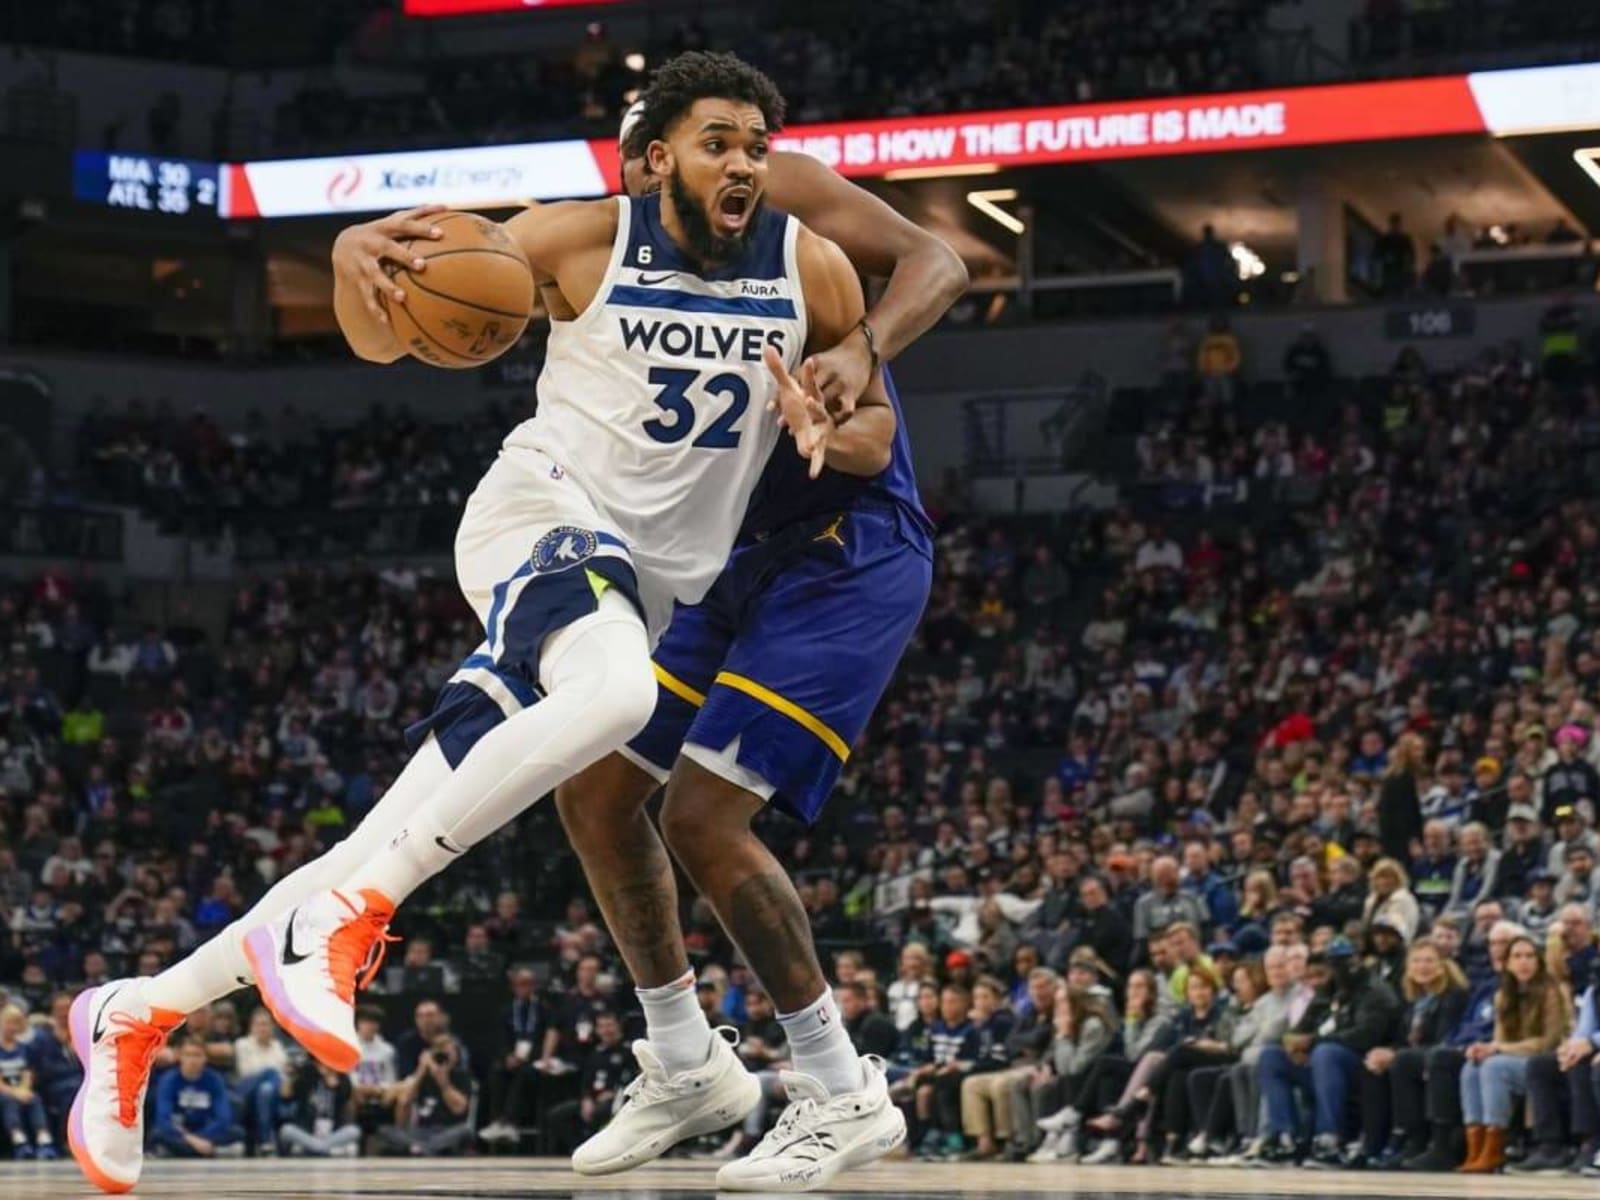 Karl-Anthony Towns reveals on Twitch stream he suffered more